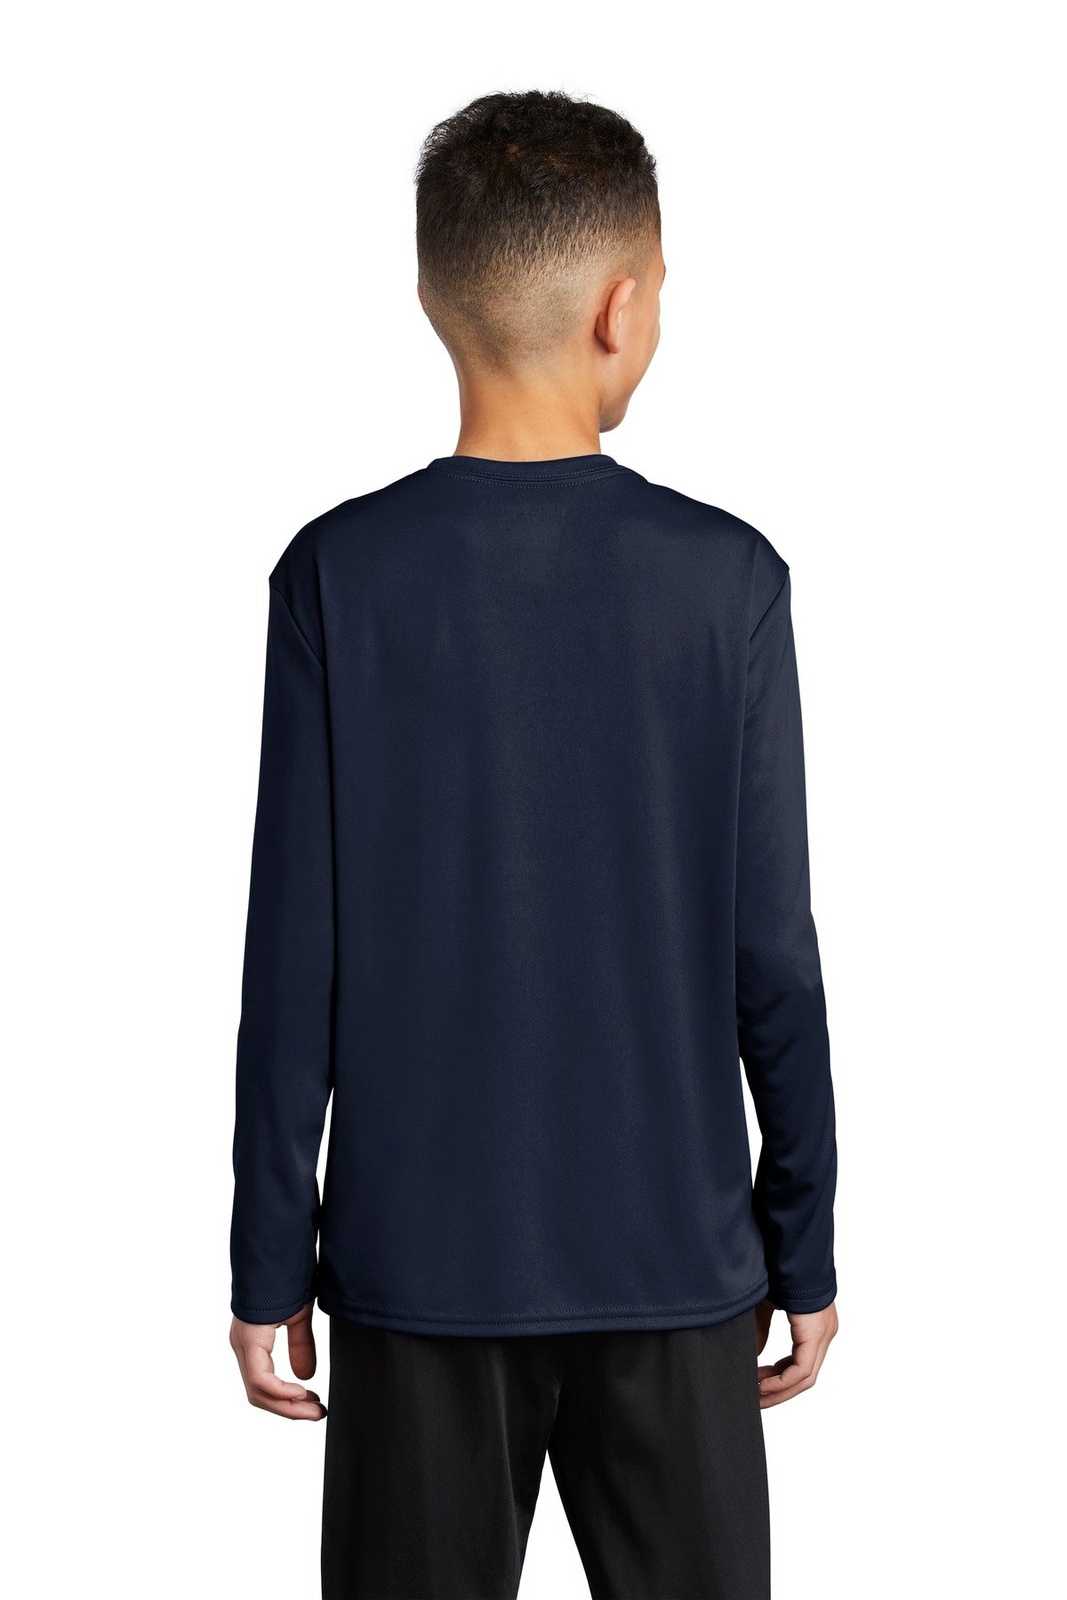 Port &amp; Company PC380YLS Youth Long Sleeve Performance Tee - Deep Navy - HIT a Double - 2